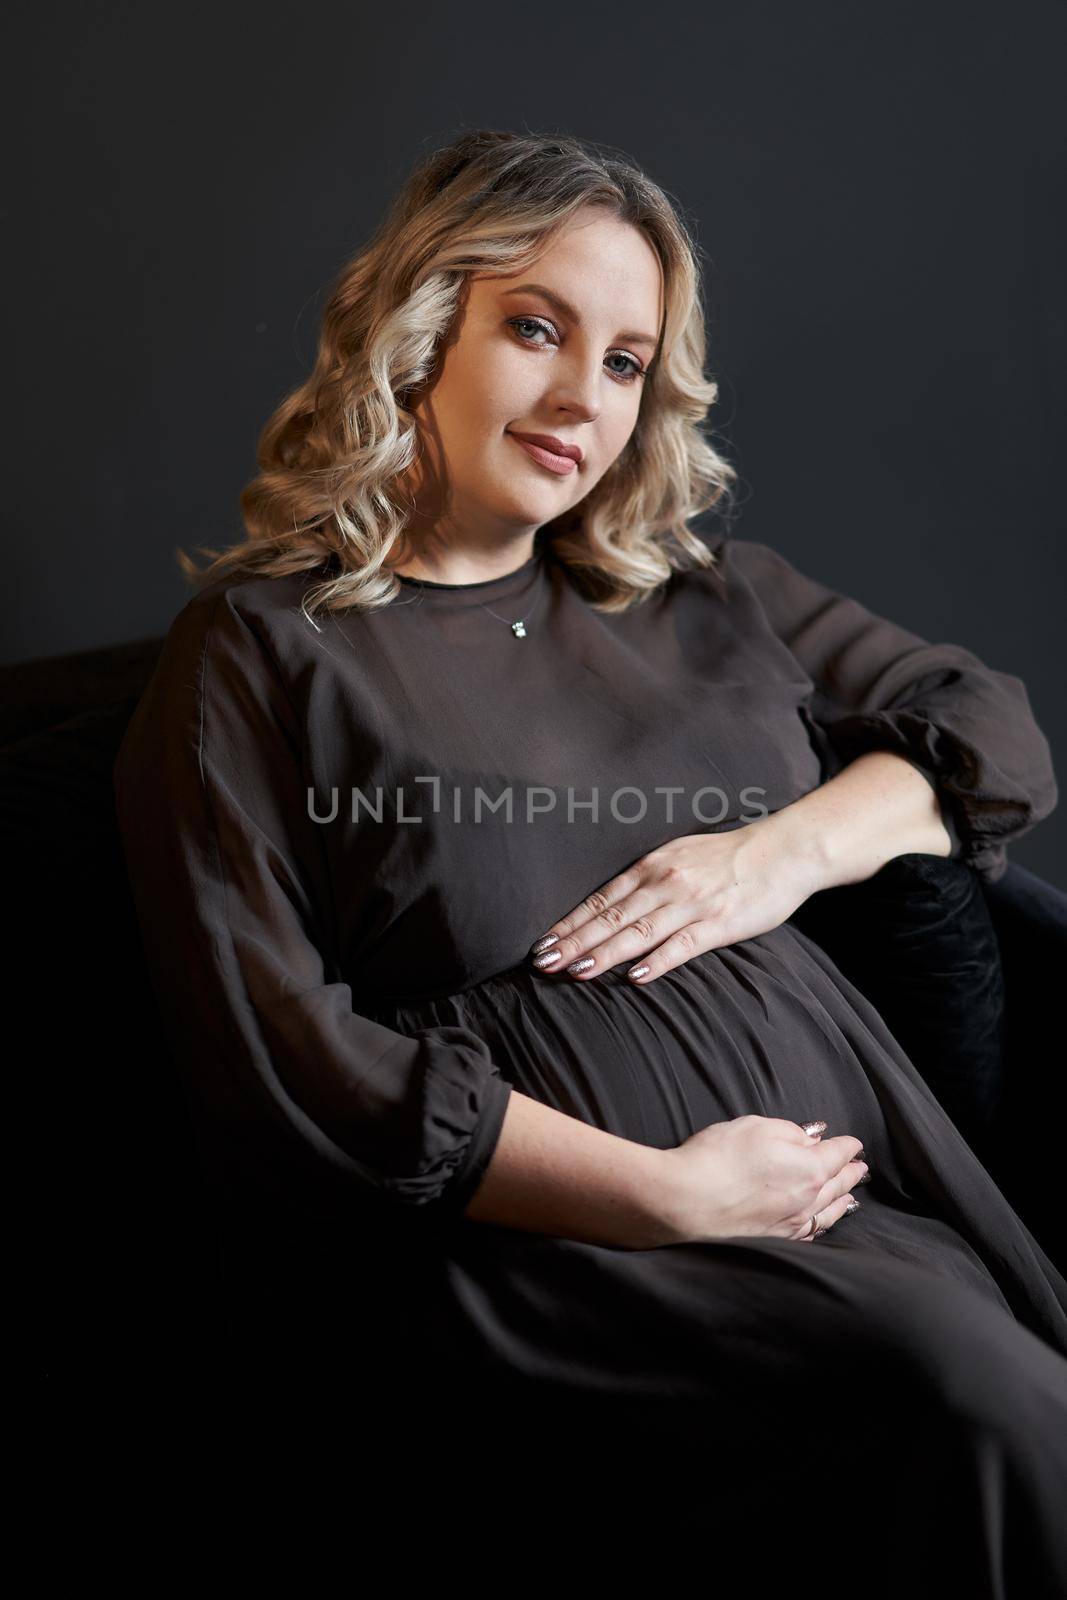 Pregnant Woman Posing In An Elegant black Dress indoors studio black wall background Blonde caucasian middle age female six month pregnancy